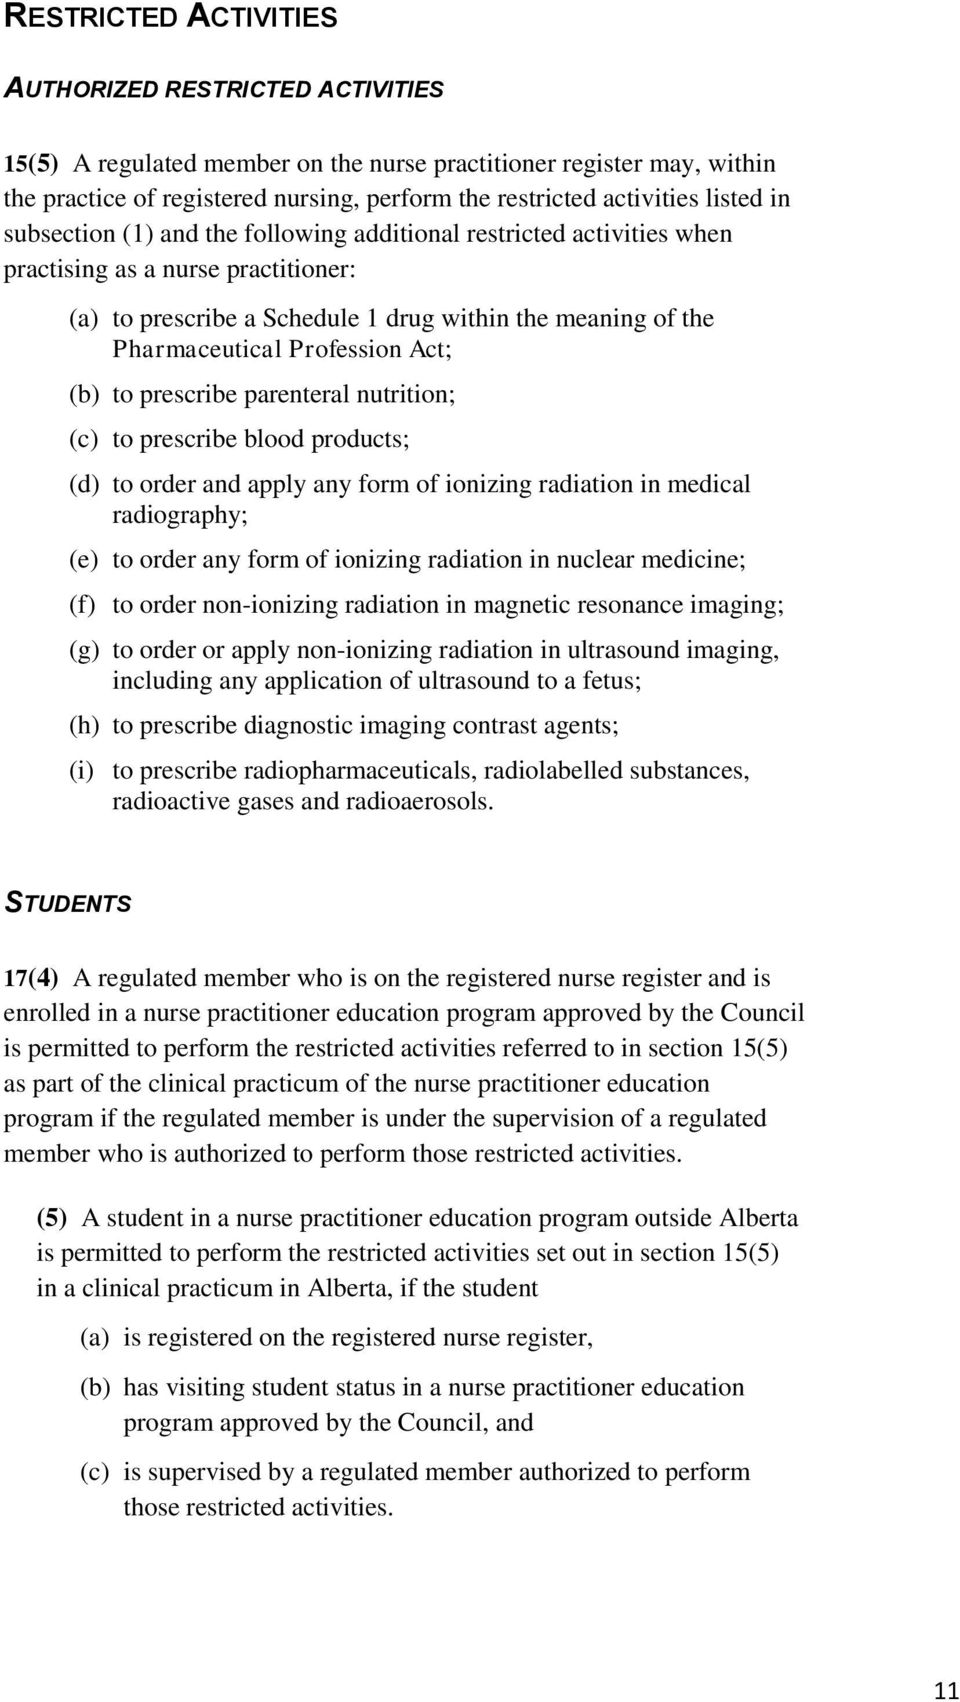 Profession Act; (b) to prescribe parenteral nutrition; (c) to prescribe blood products; (d) to order and apply any form of ionizing radiation in medical radiography; (e) to order any form of ionizing